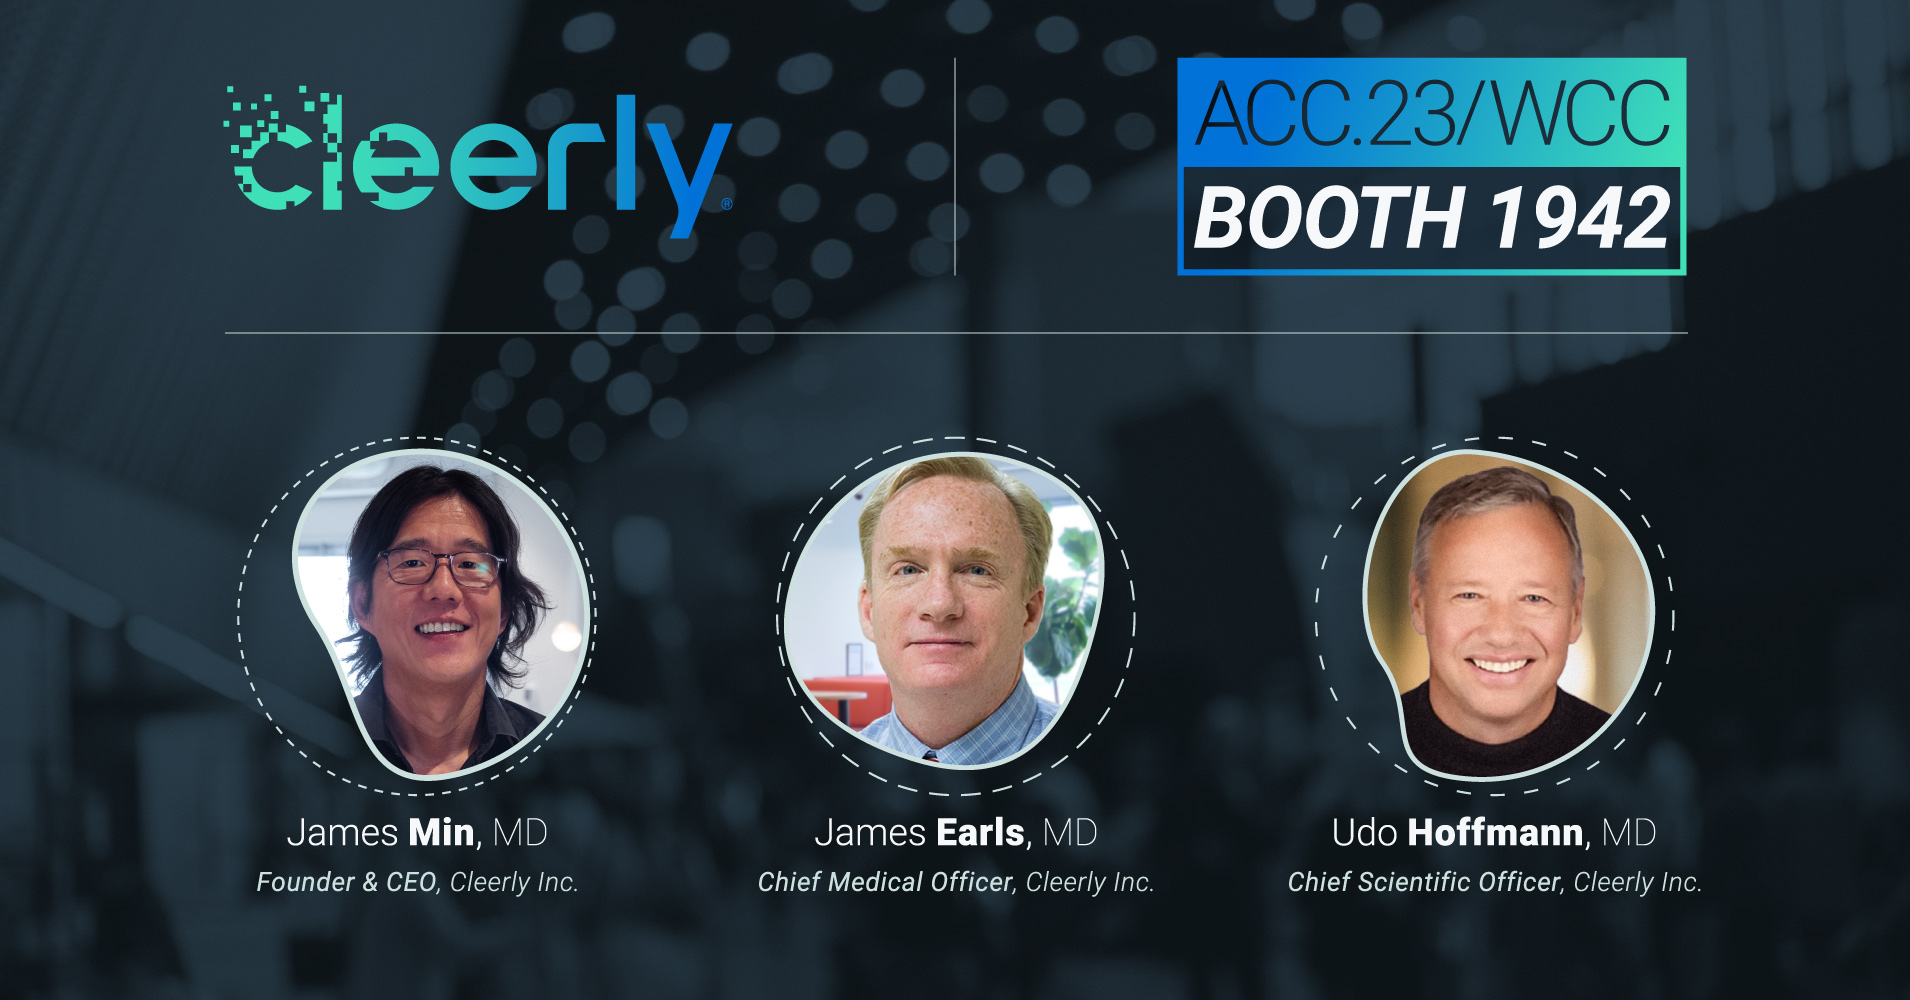 Cleerly to Present New Clinical Evidence on AI-Enabled CCTA at ACC.23/WCC